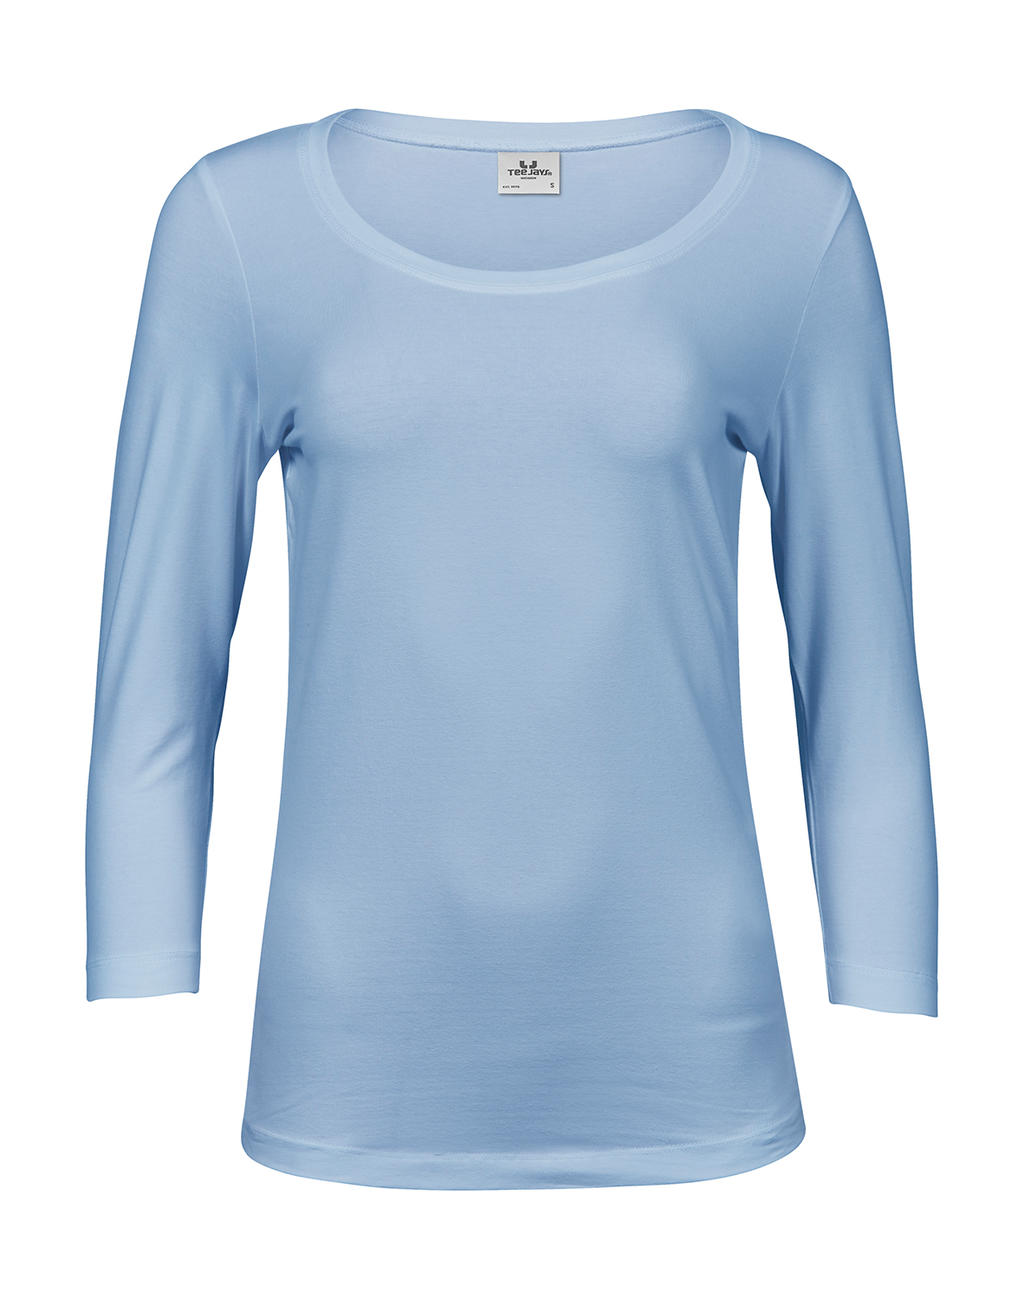  Ladies 3/4 Sleeve Stretch Tee in Farbe Light Blue